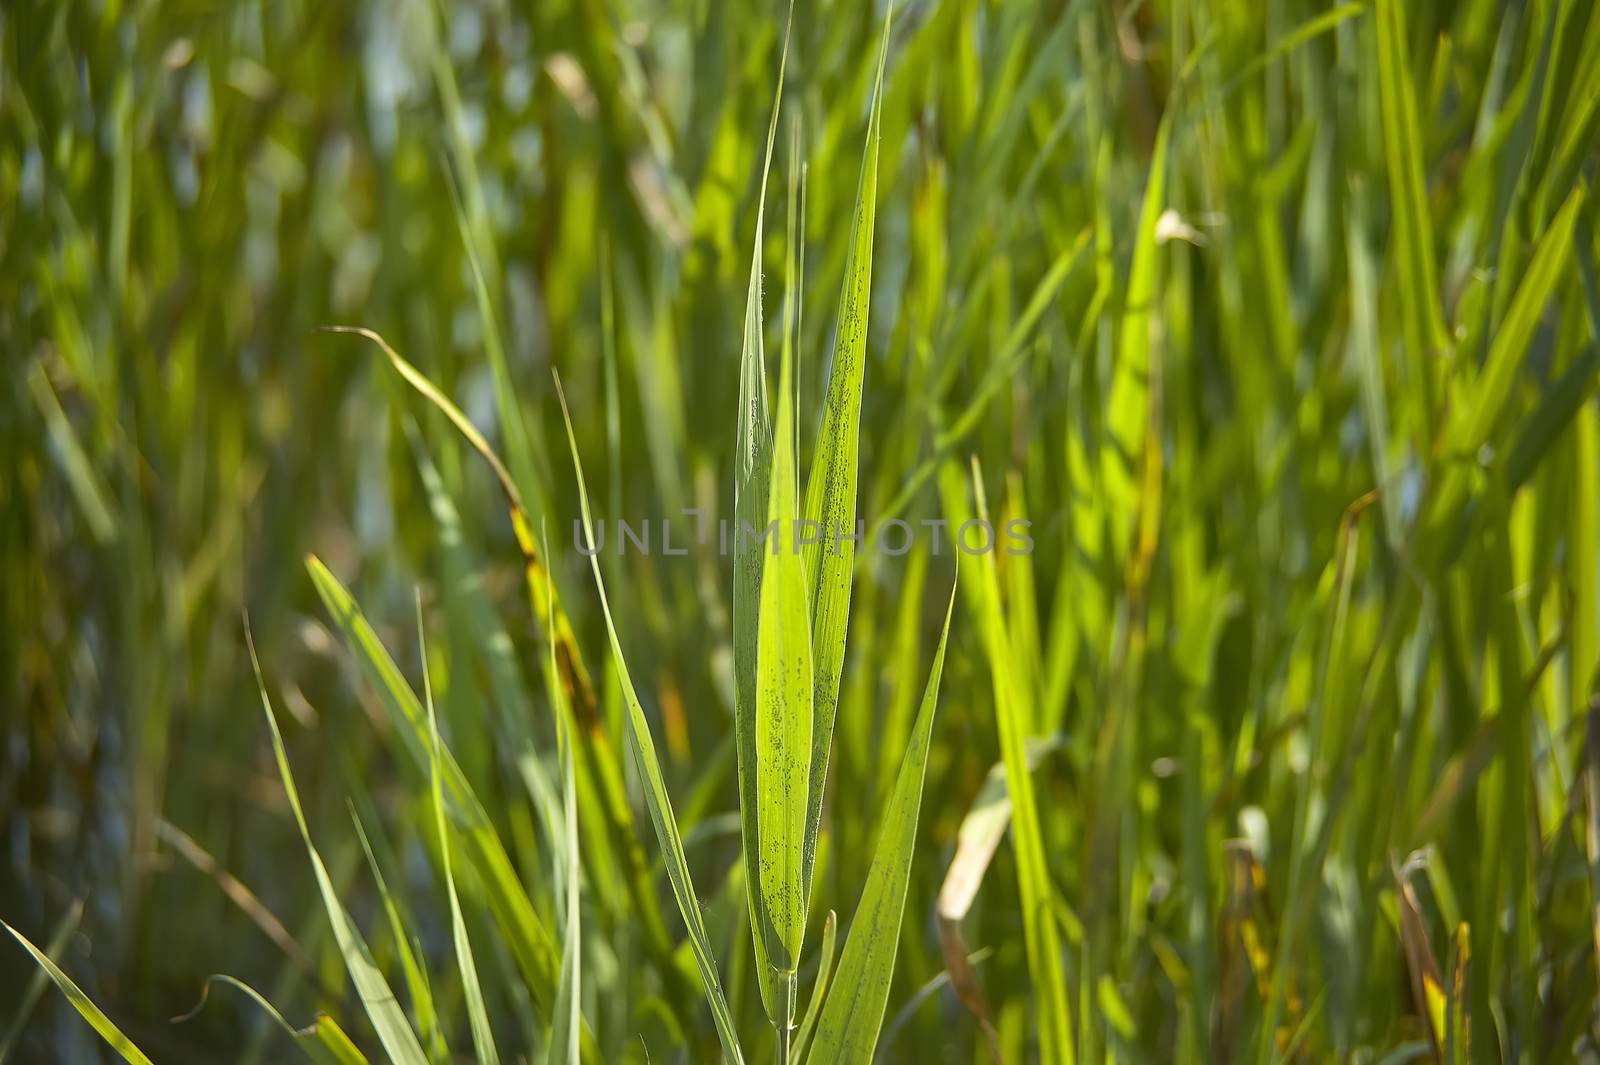 Close-up view of grass tufts in a pond full of water, lit by daylight in the summer.